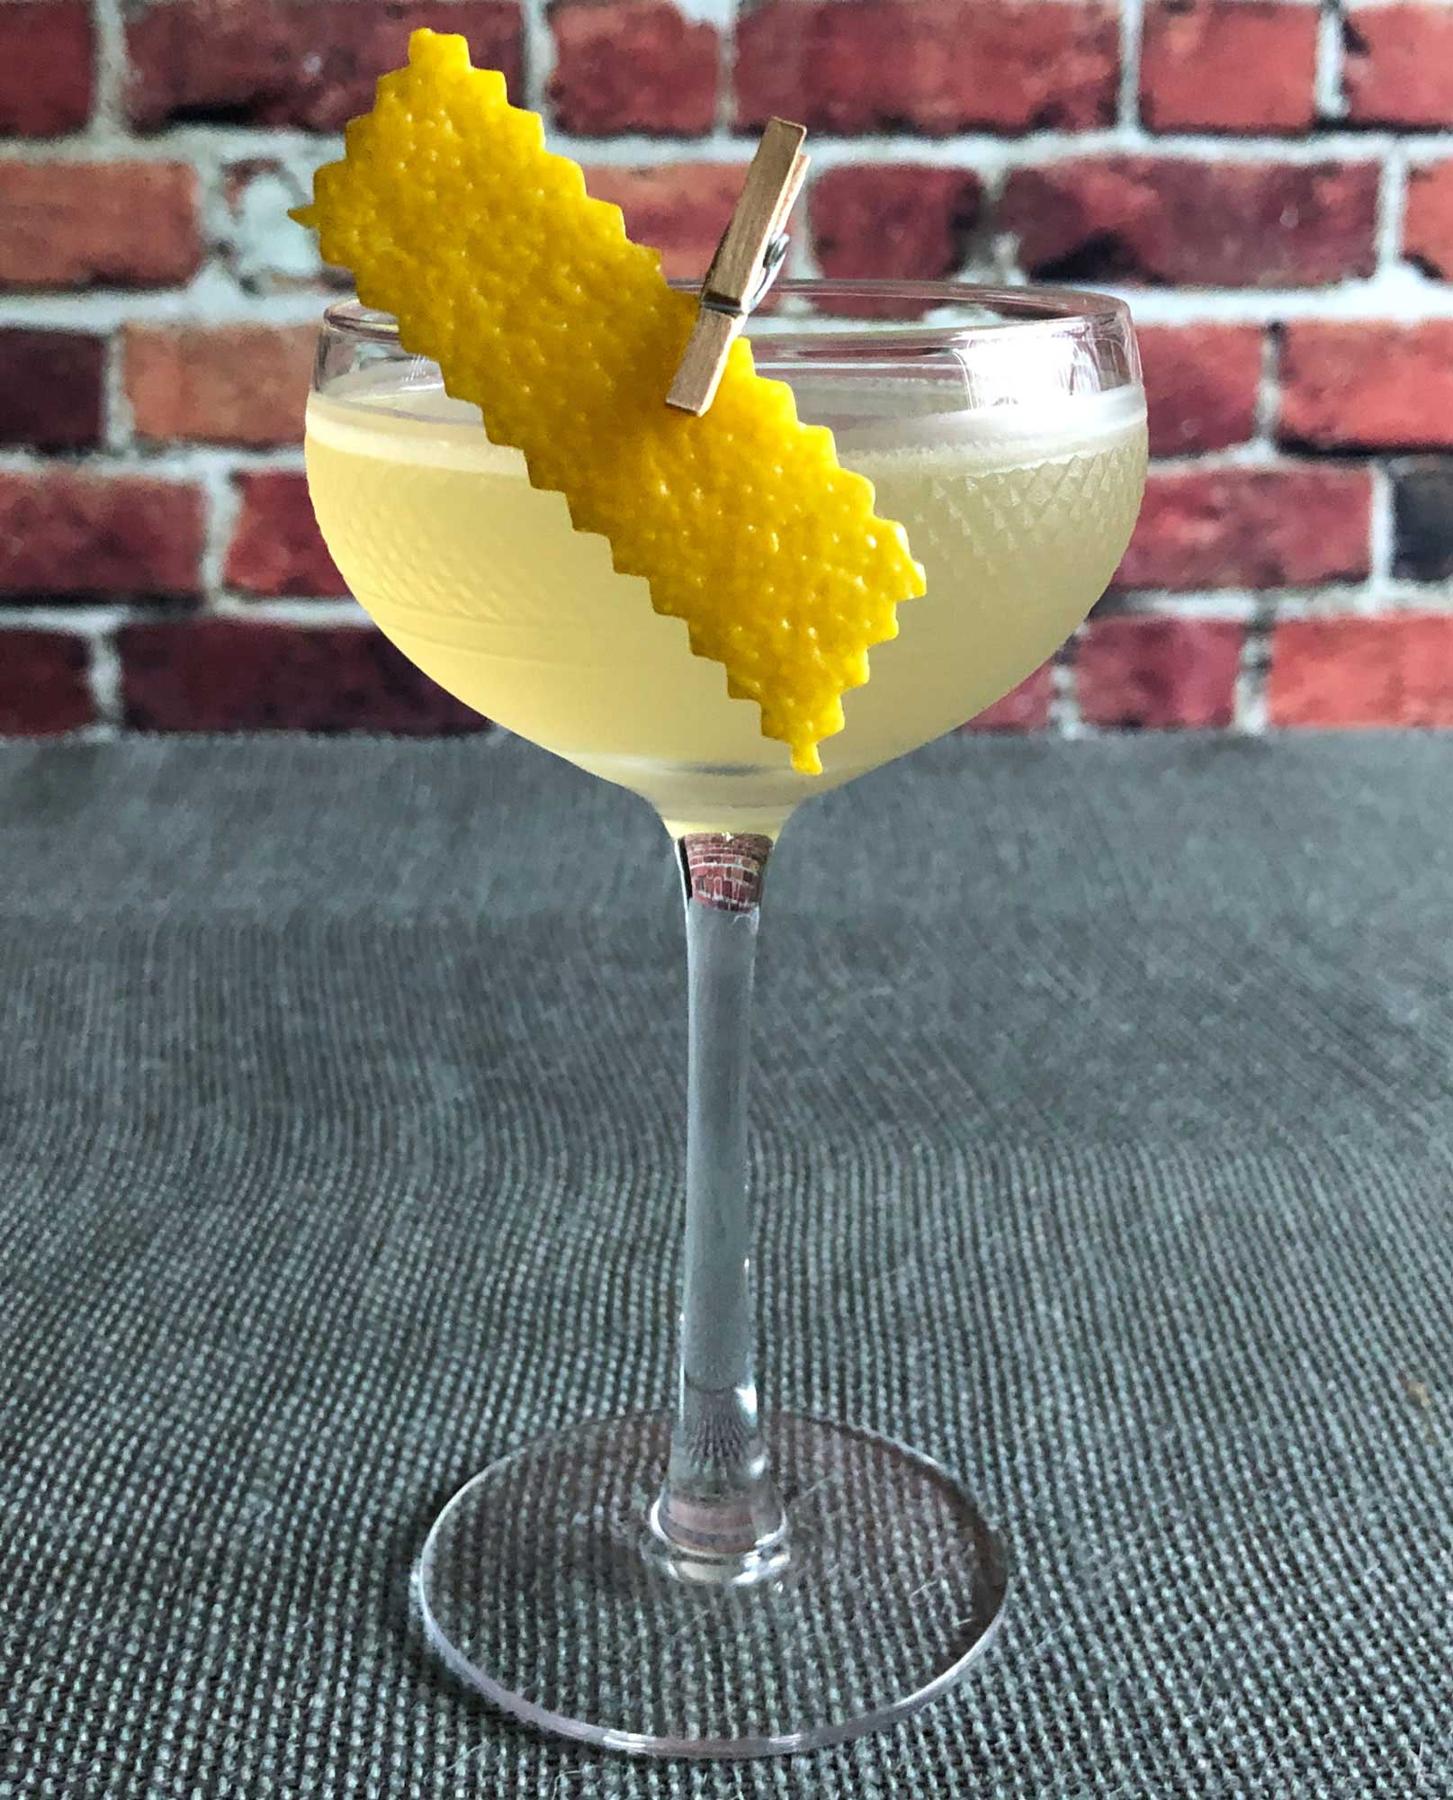 An example of the Her Word, the mixed drink (drink) featuring blanco tequila, Rothman & Winter Orchard Peach Liqueur, Cocchi Americano Bianco, lemon juice, and lemon twist; photo by Lee Edwards